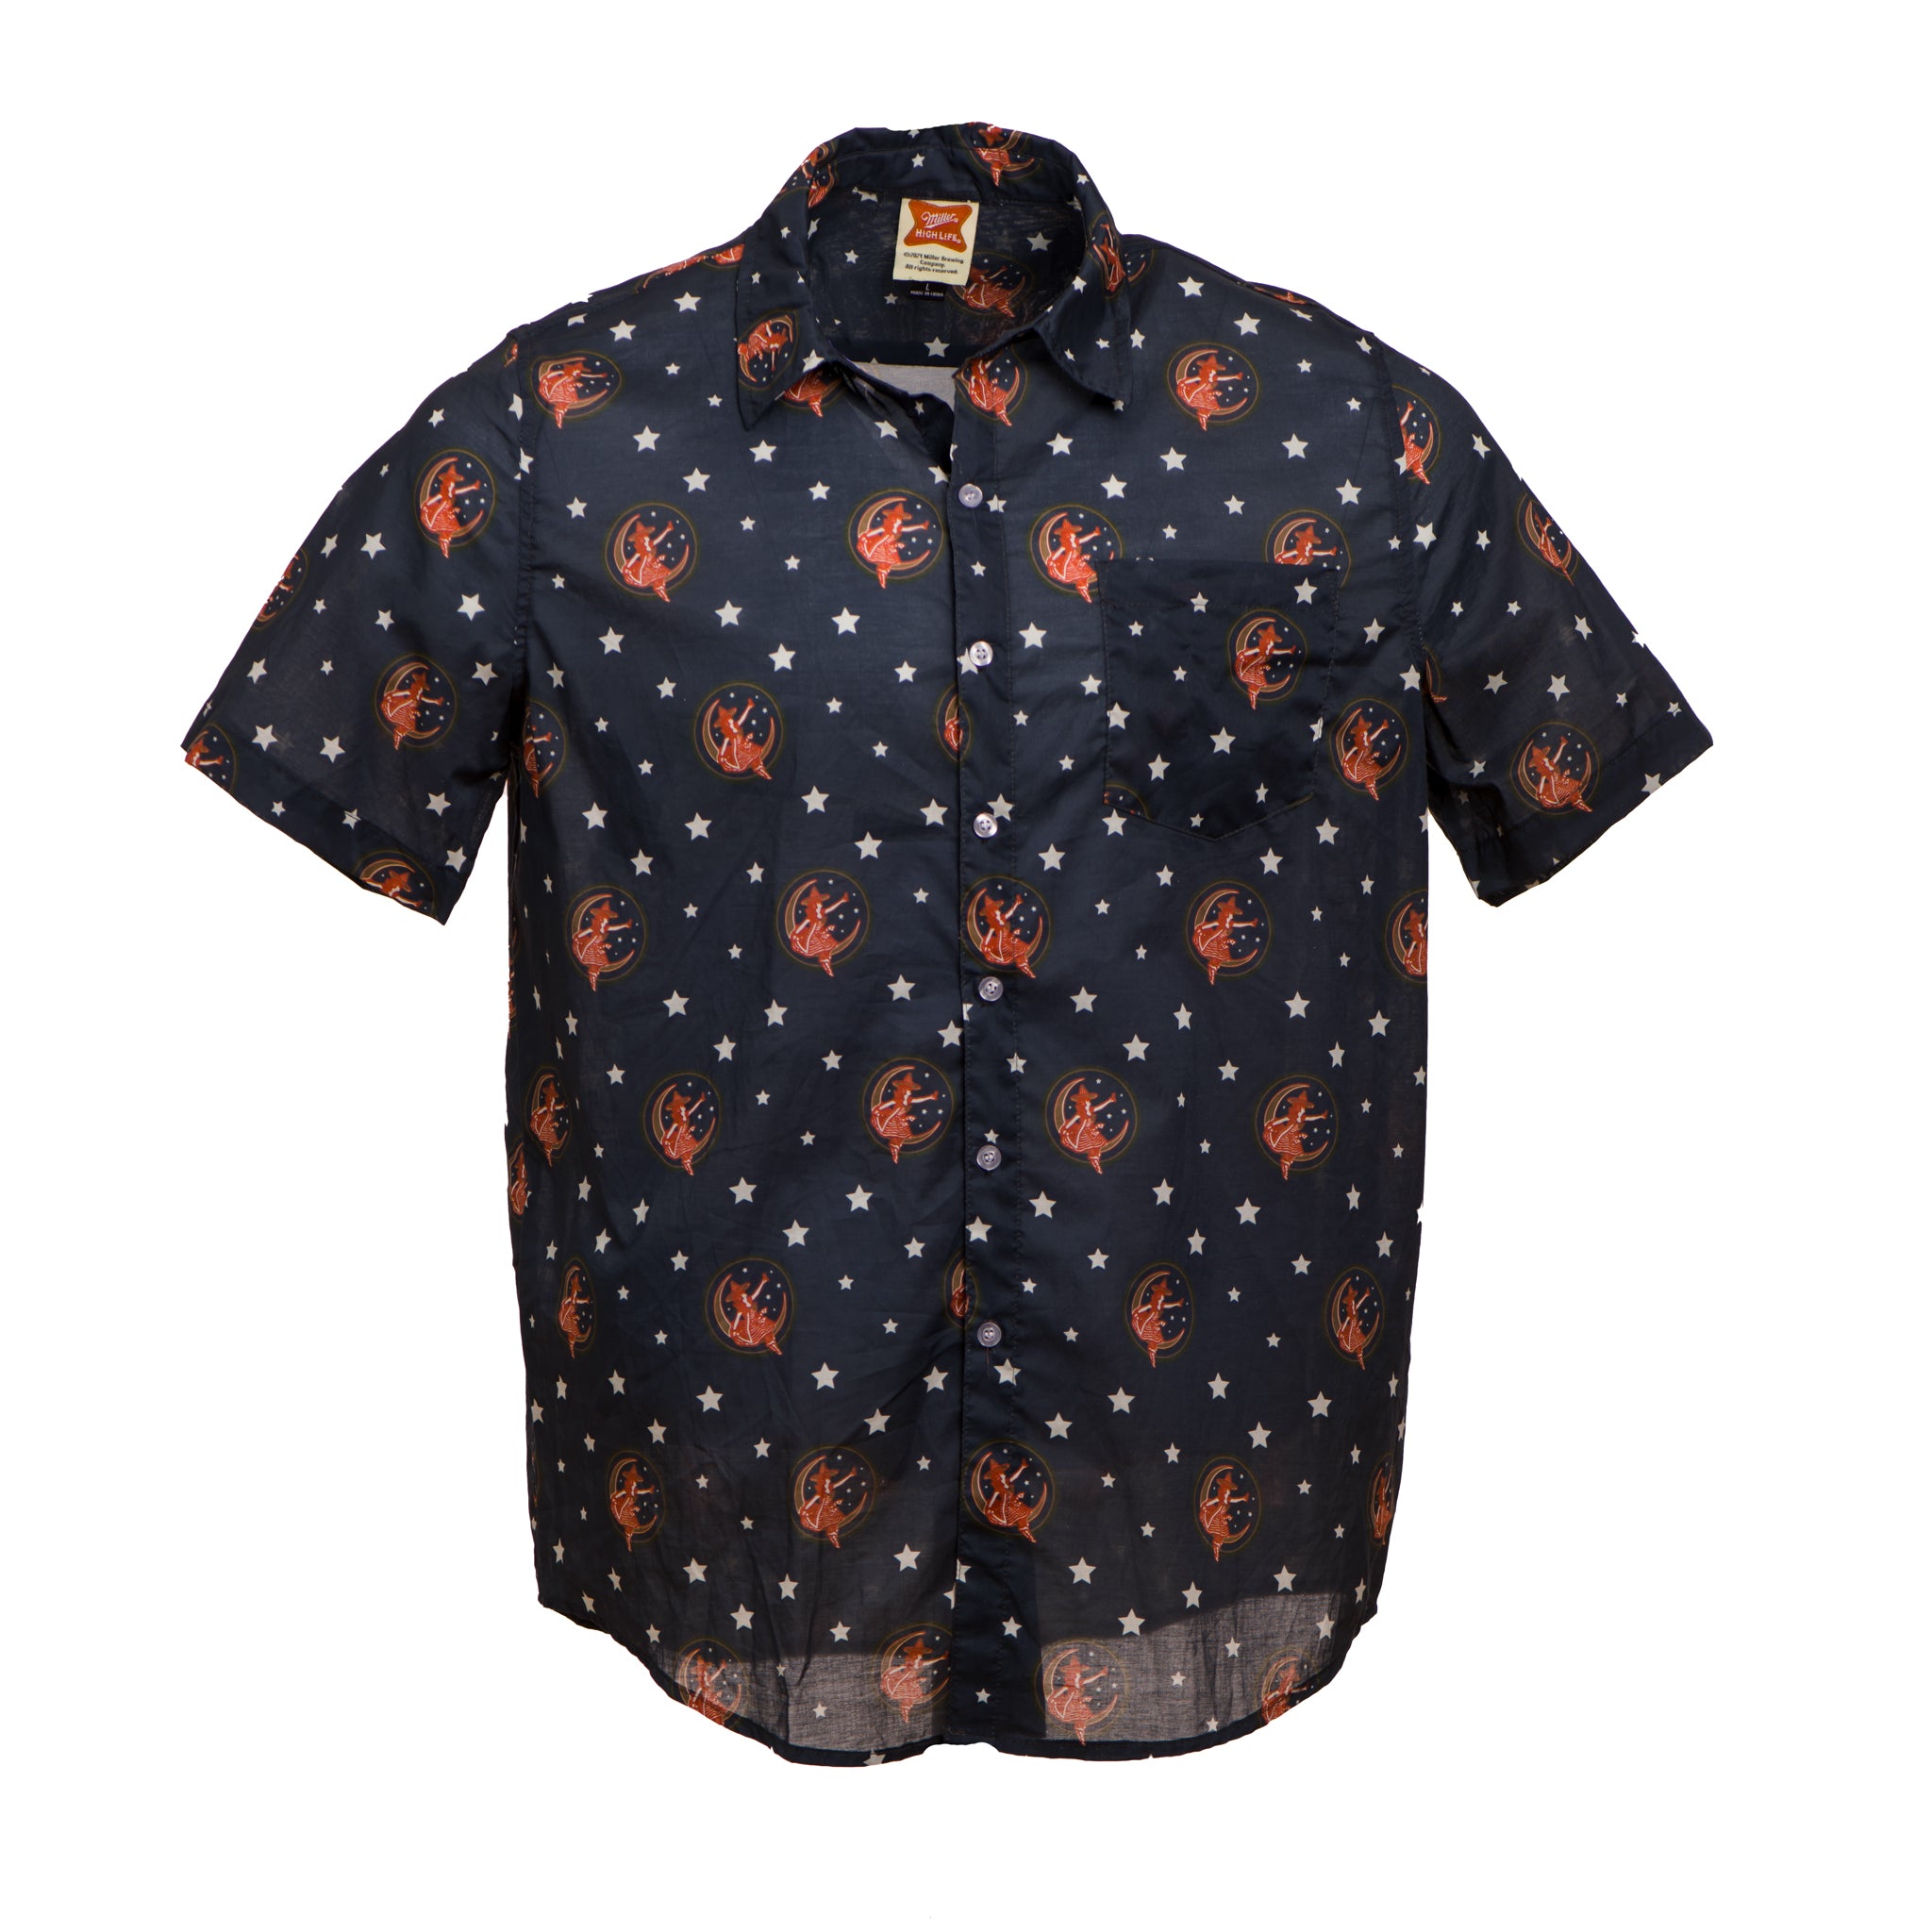 GIRL IN THE MOON BUTTON UP – Miller High Life Shop